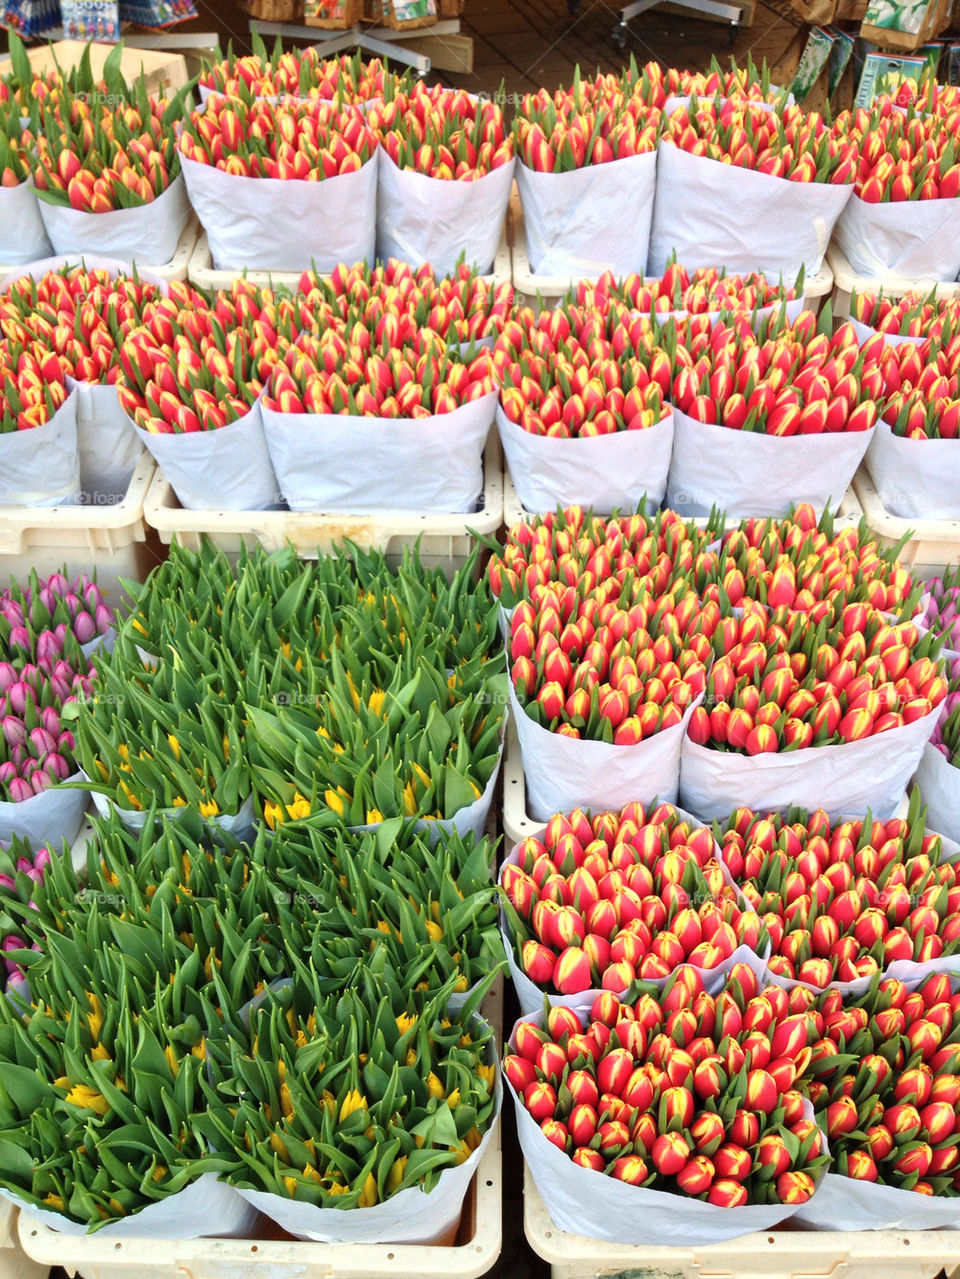 Bunches of colorful tulips in a market